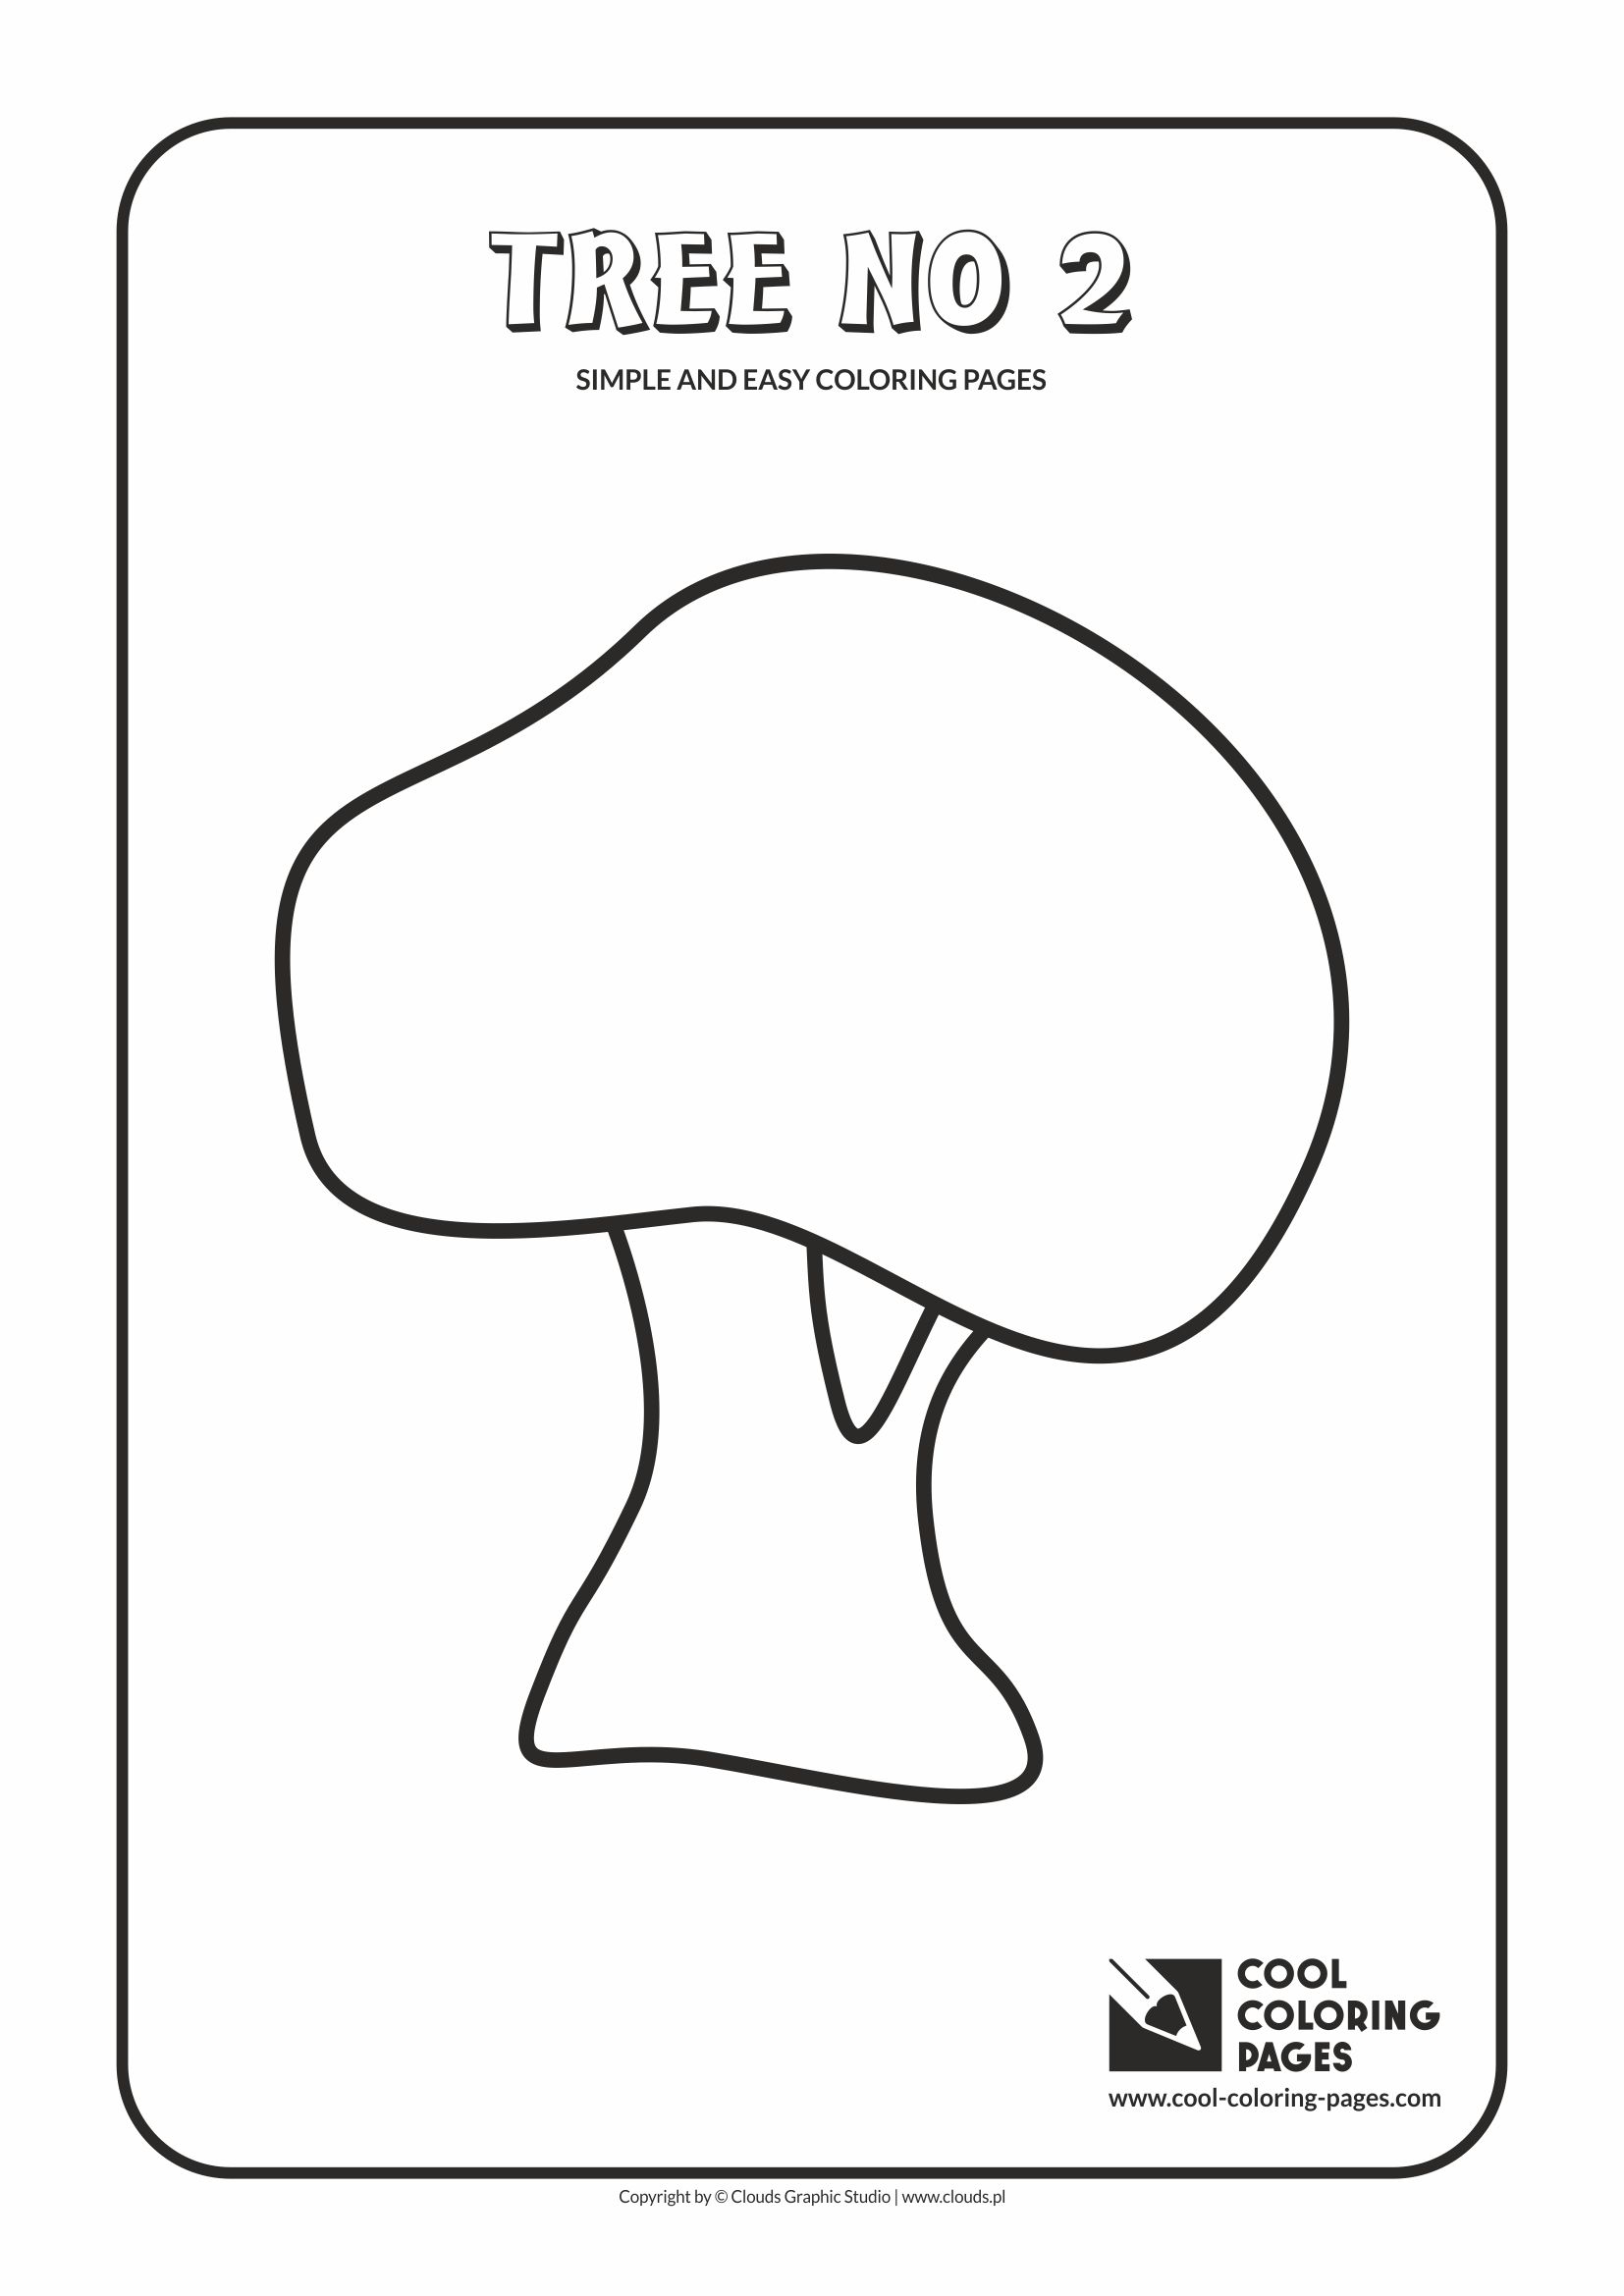 Simple and easy coloring pages for toddlers - Tree no 2